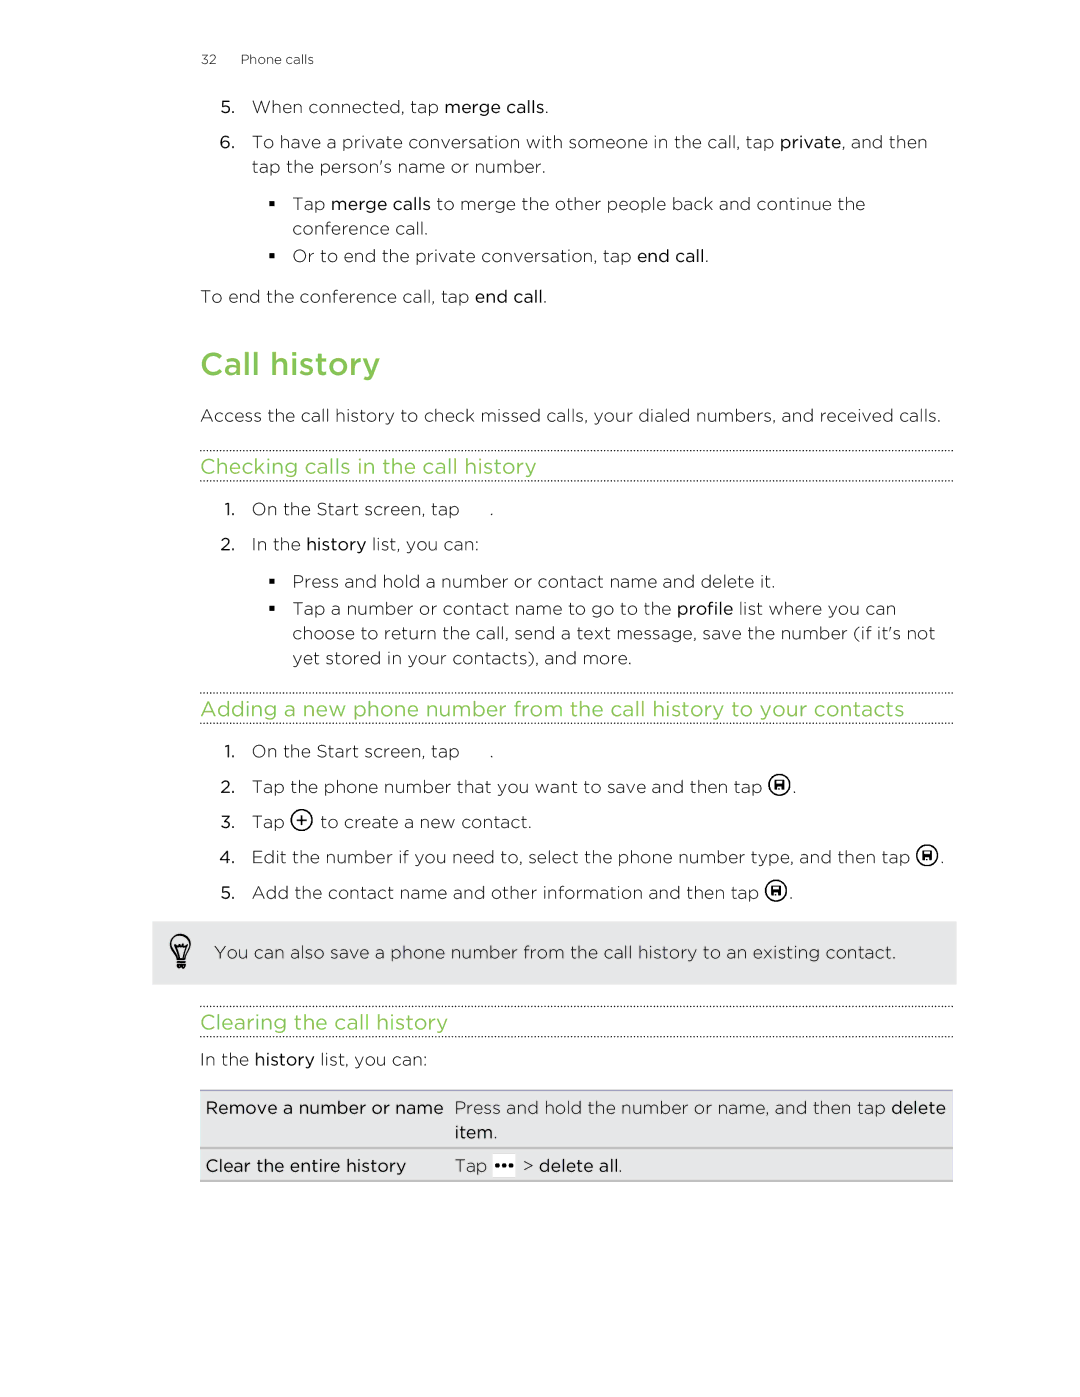 HTC 8X manual Call history, Checking calls in the call history, Clearing the call history 